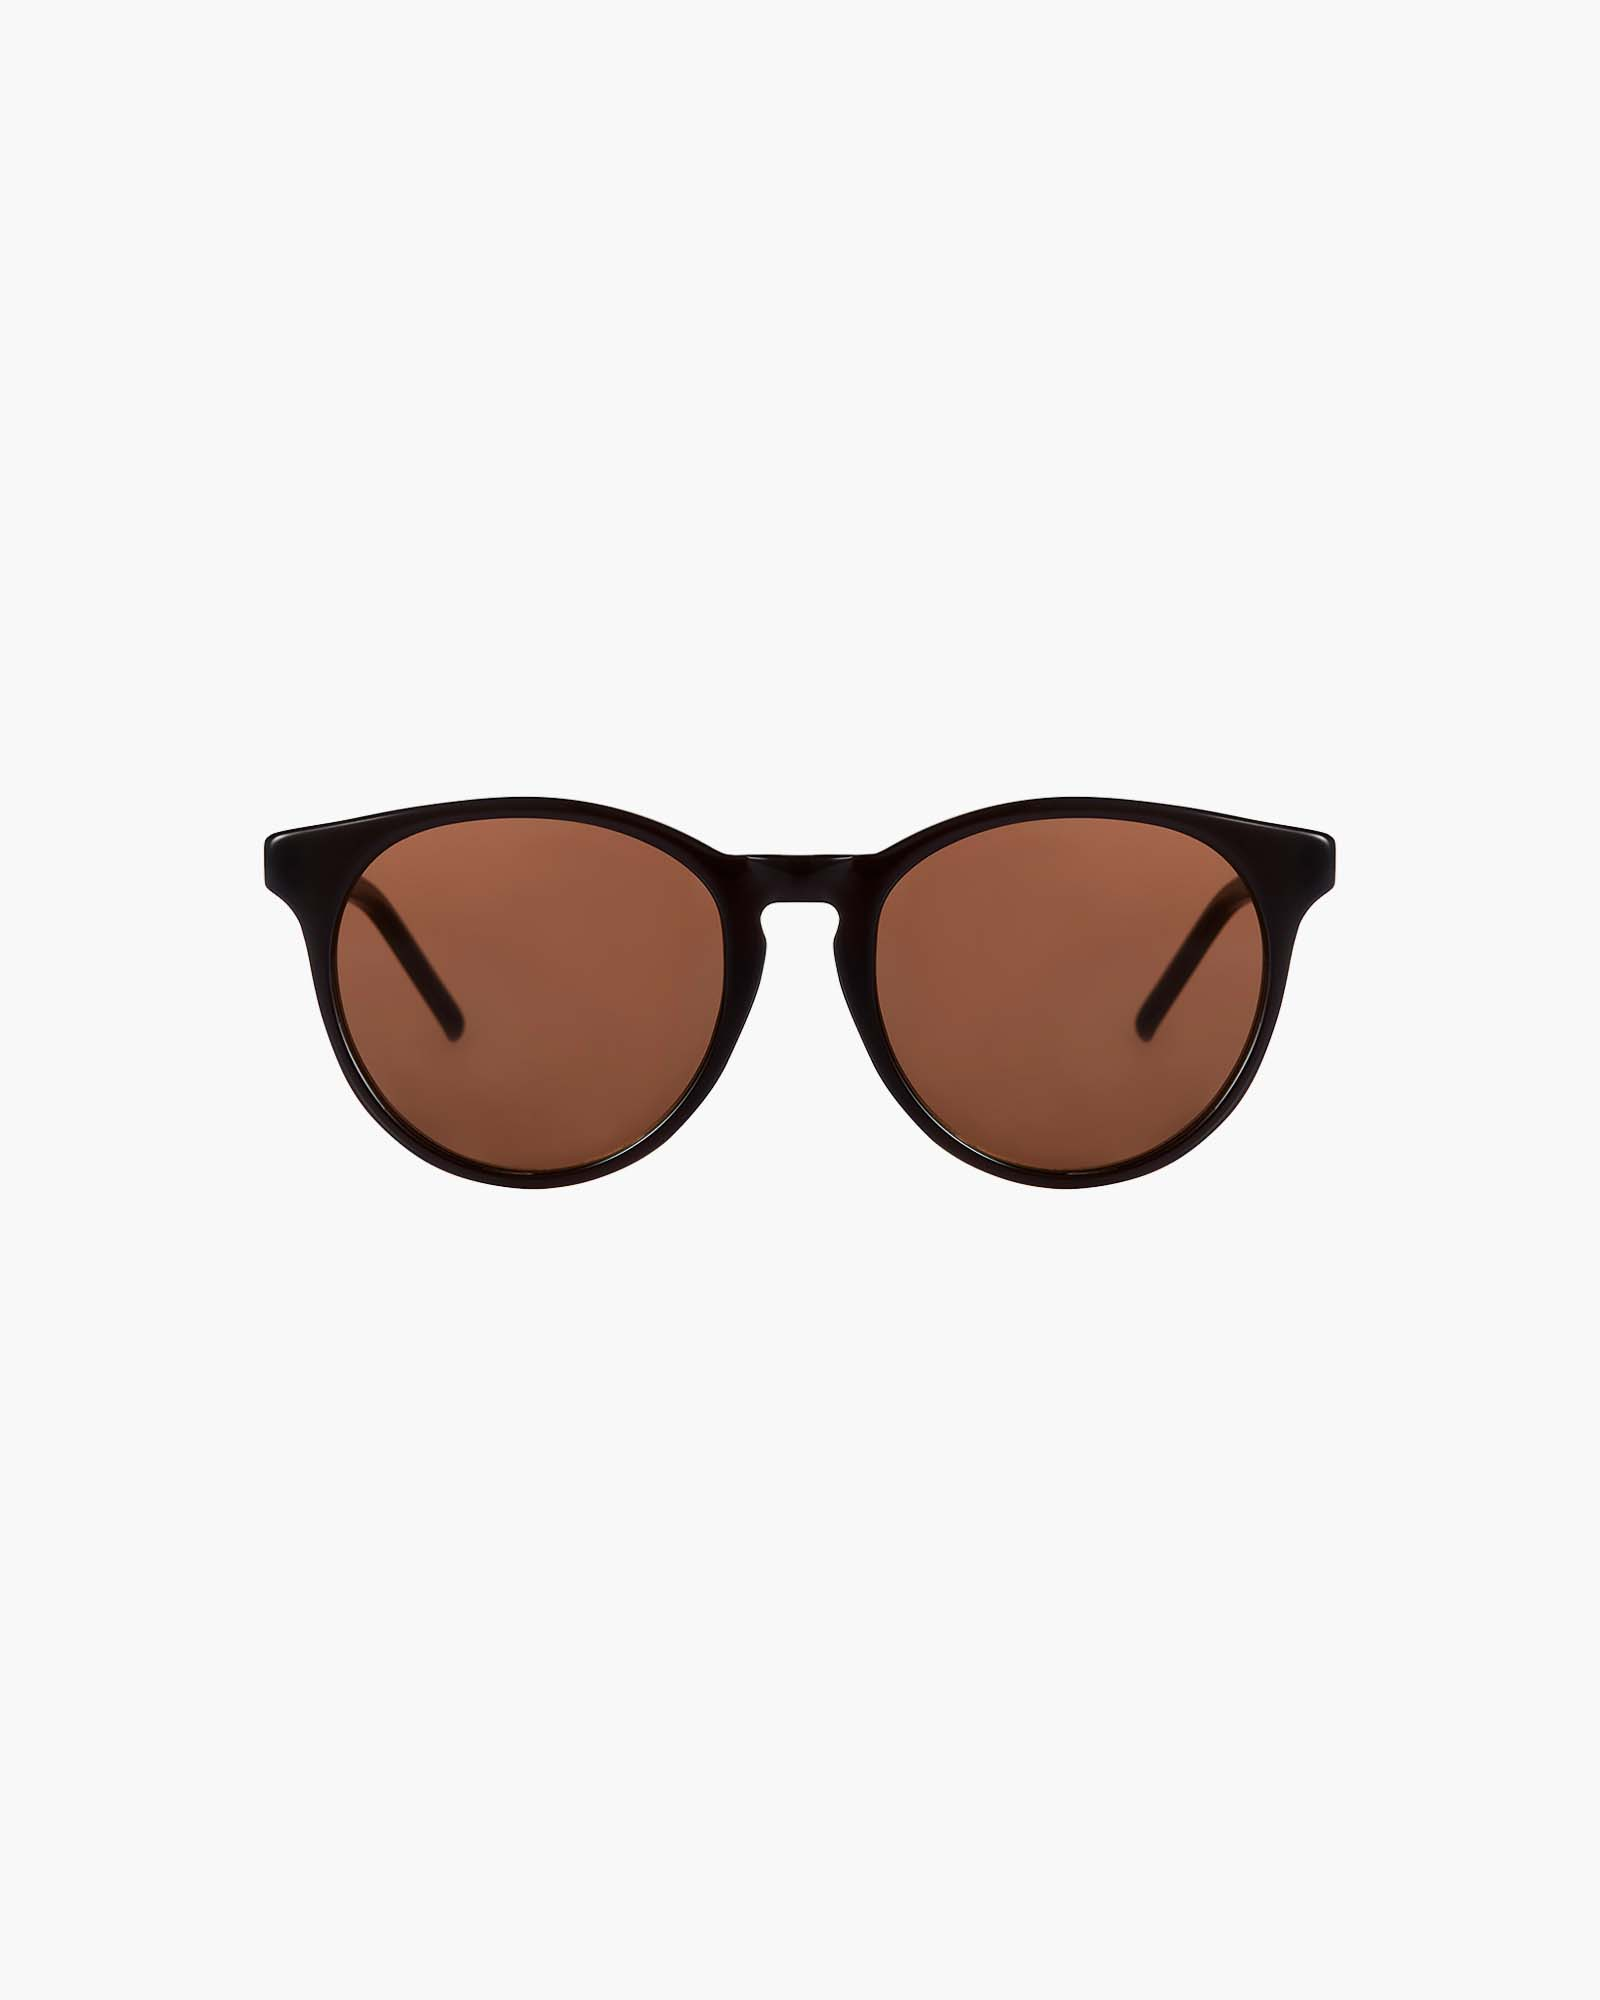 rae sunglasses - product page